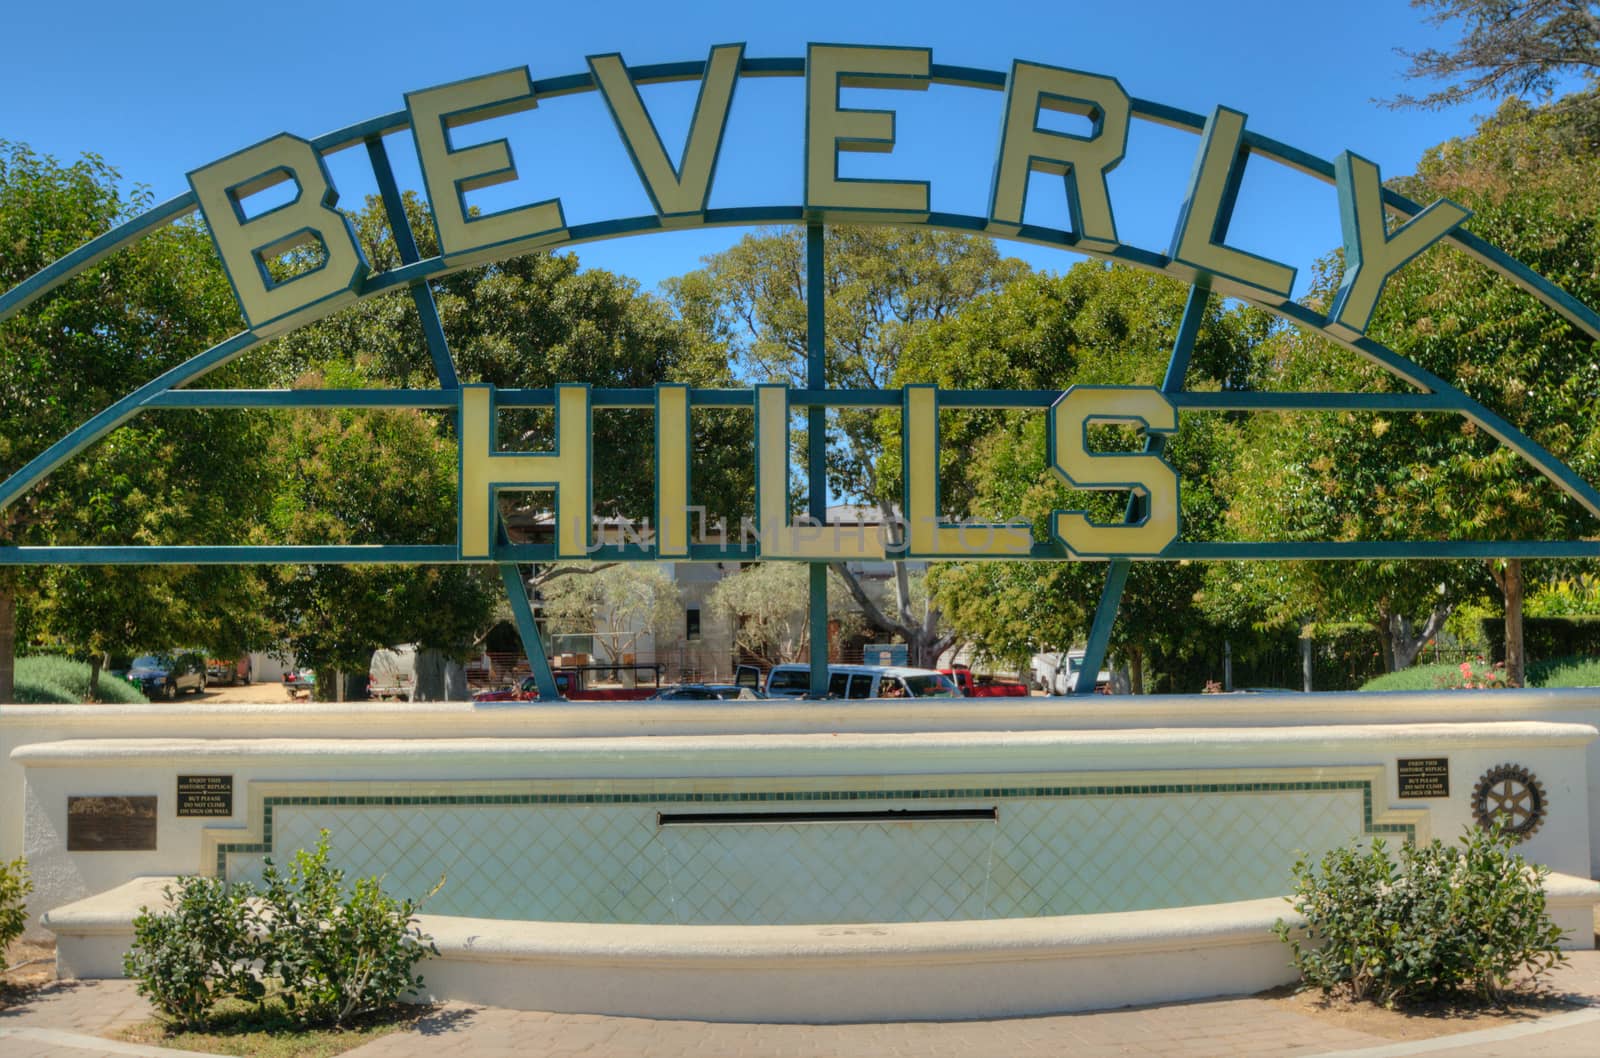 LOS ANGELES, USA - AUGUST 23: Beverly Hills sign,2013 by weltreisendertj